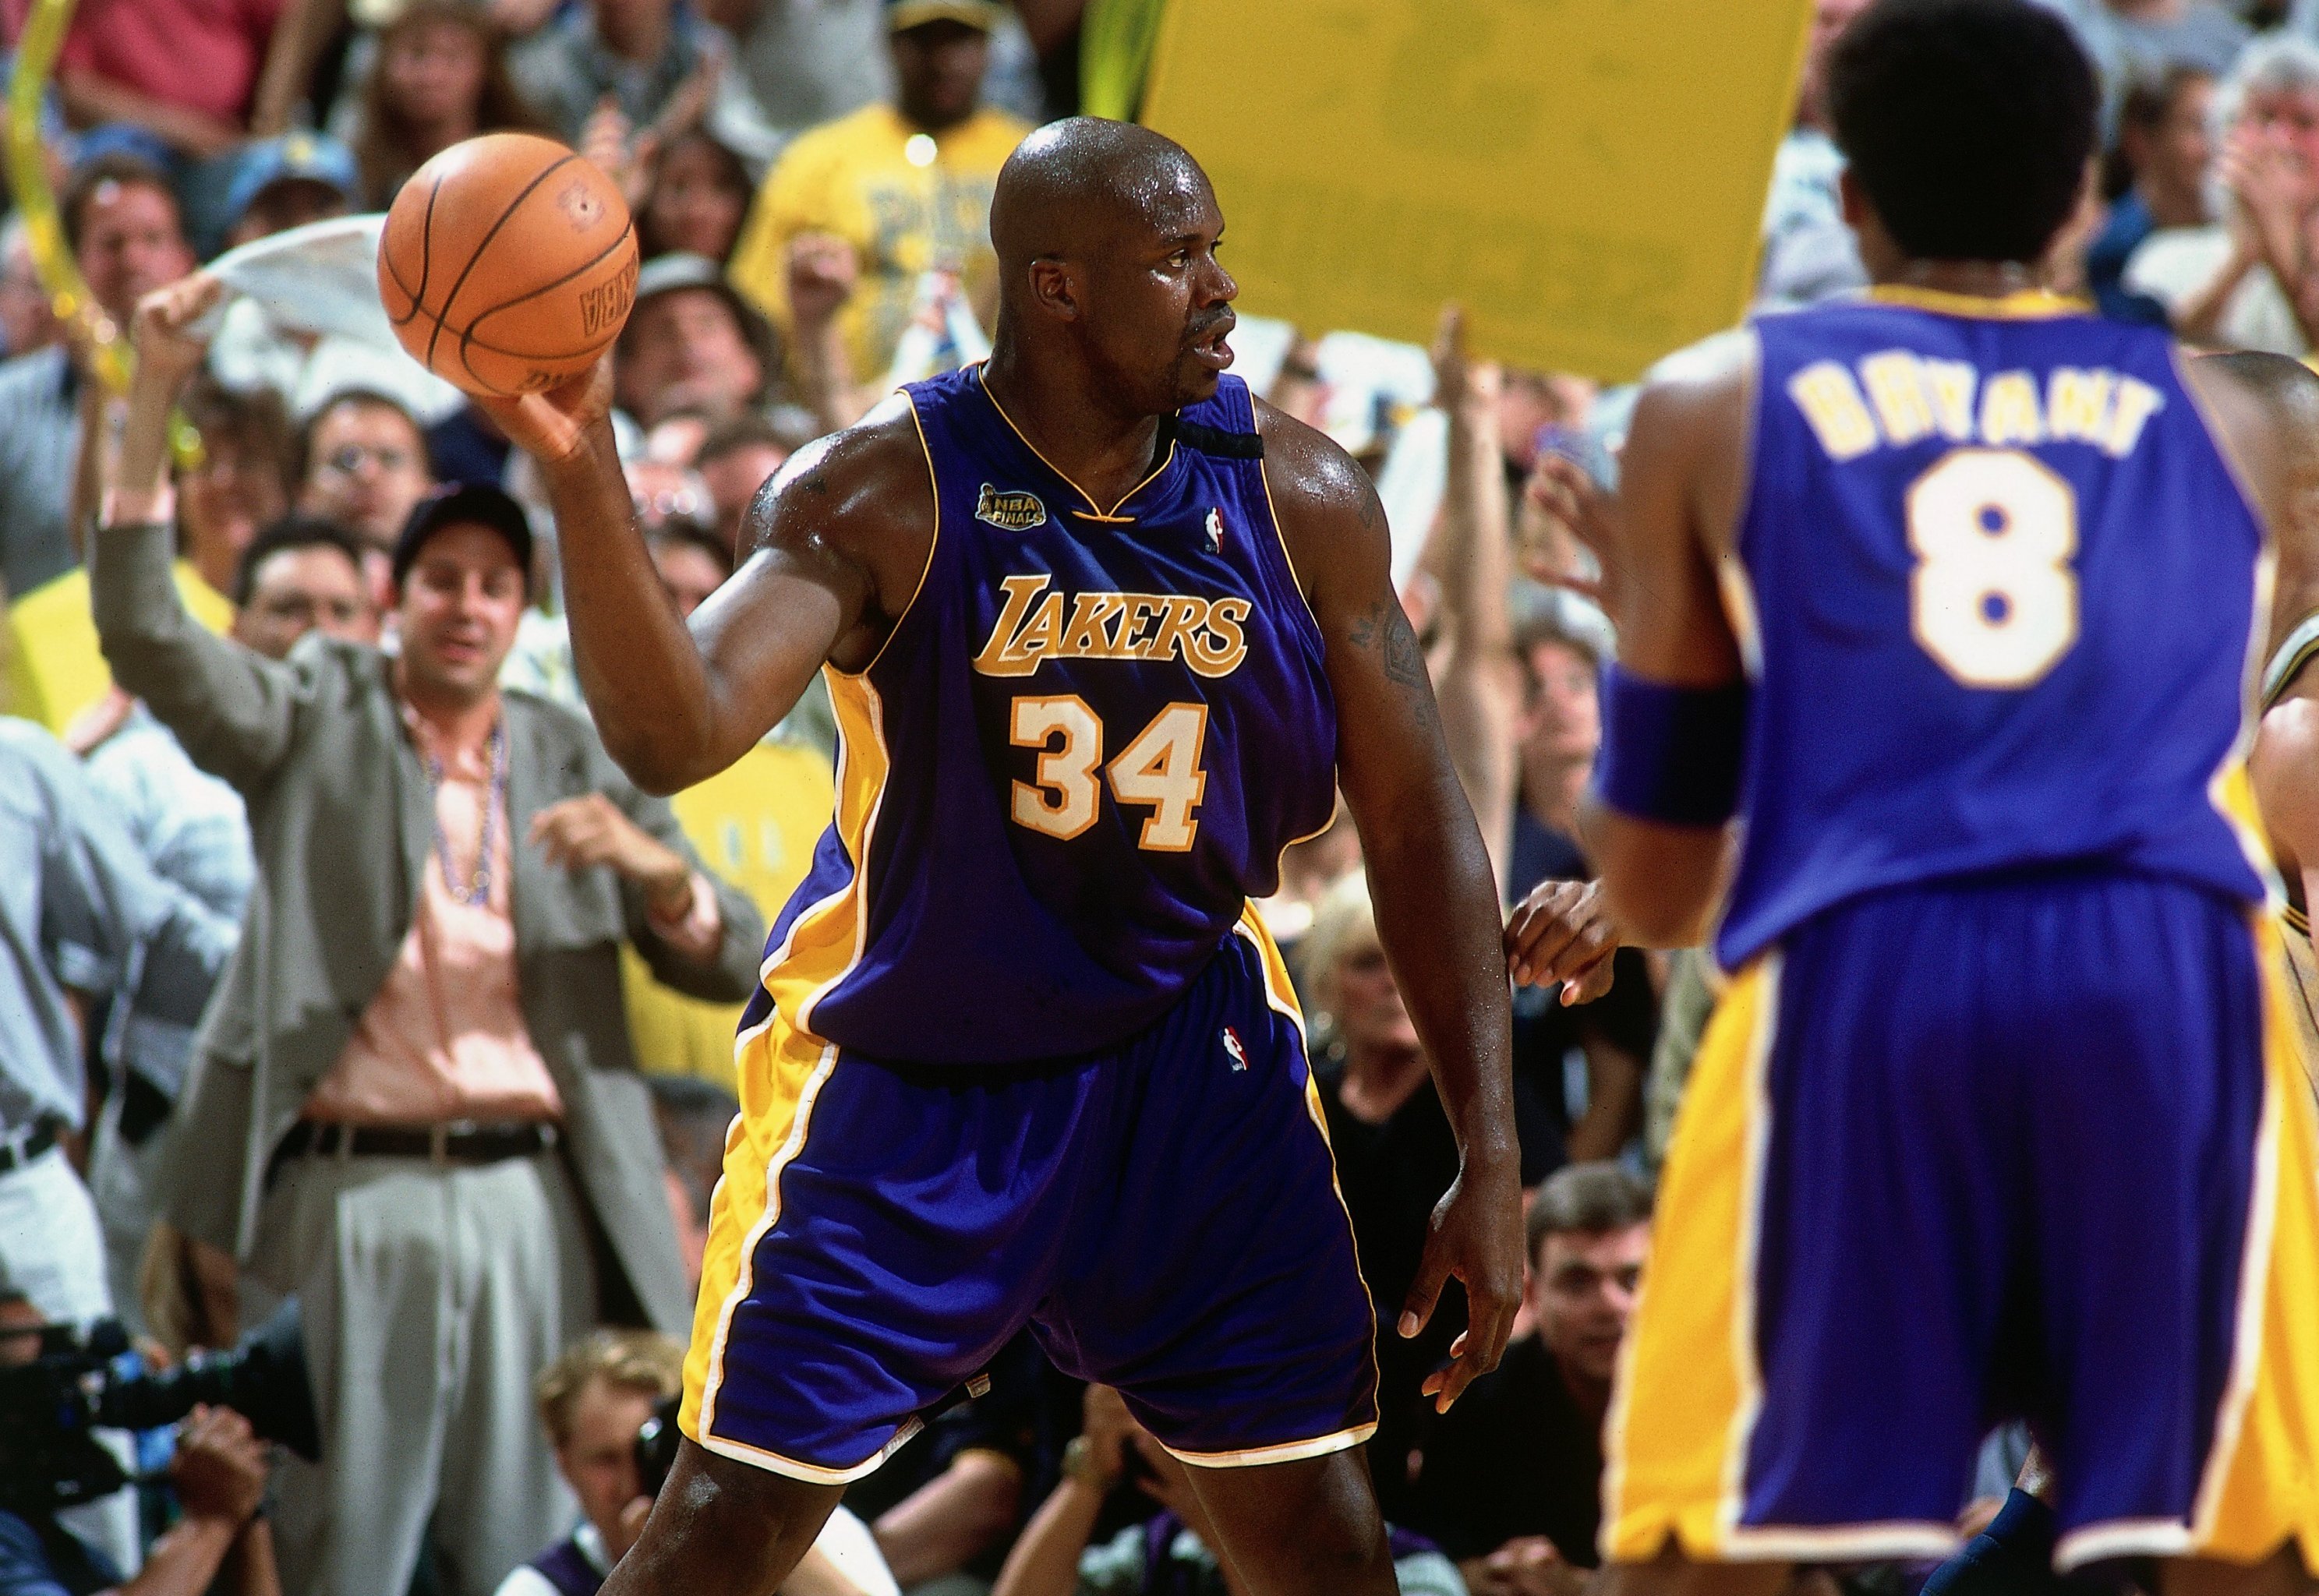 Lakers: Shaq says he and Kobe Bryant would have 'easily' beaten